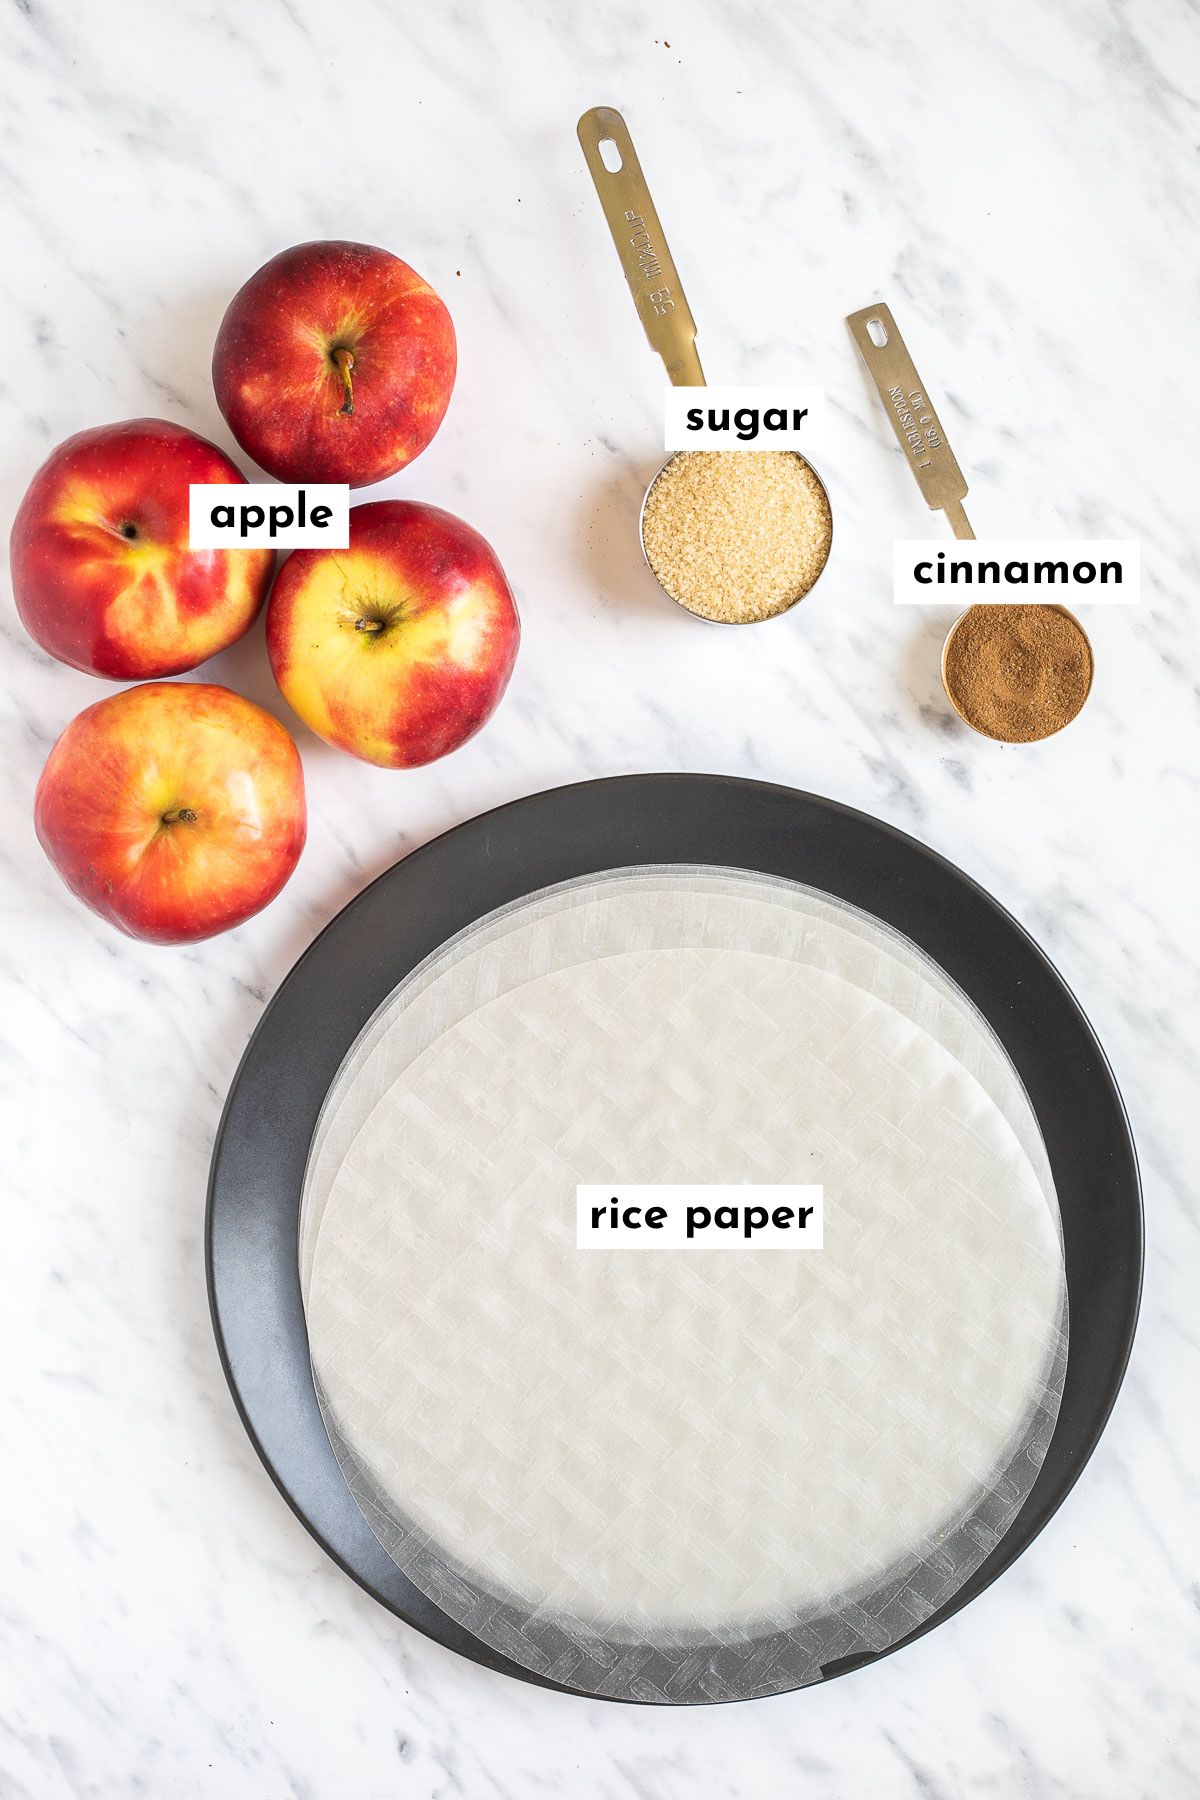 Ingredients of apple pie spring rolls placed on a marble surface. They are apples, rice paper sheets, a measuring spoon of sugar and a measuring spoon full of cinnamon.